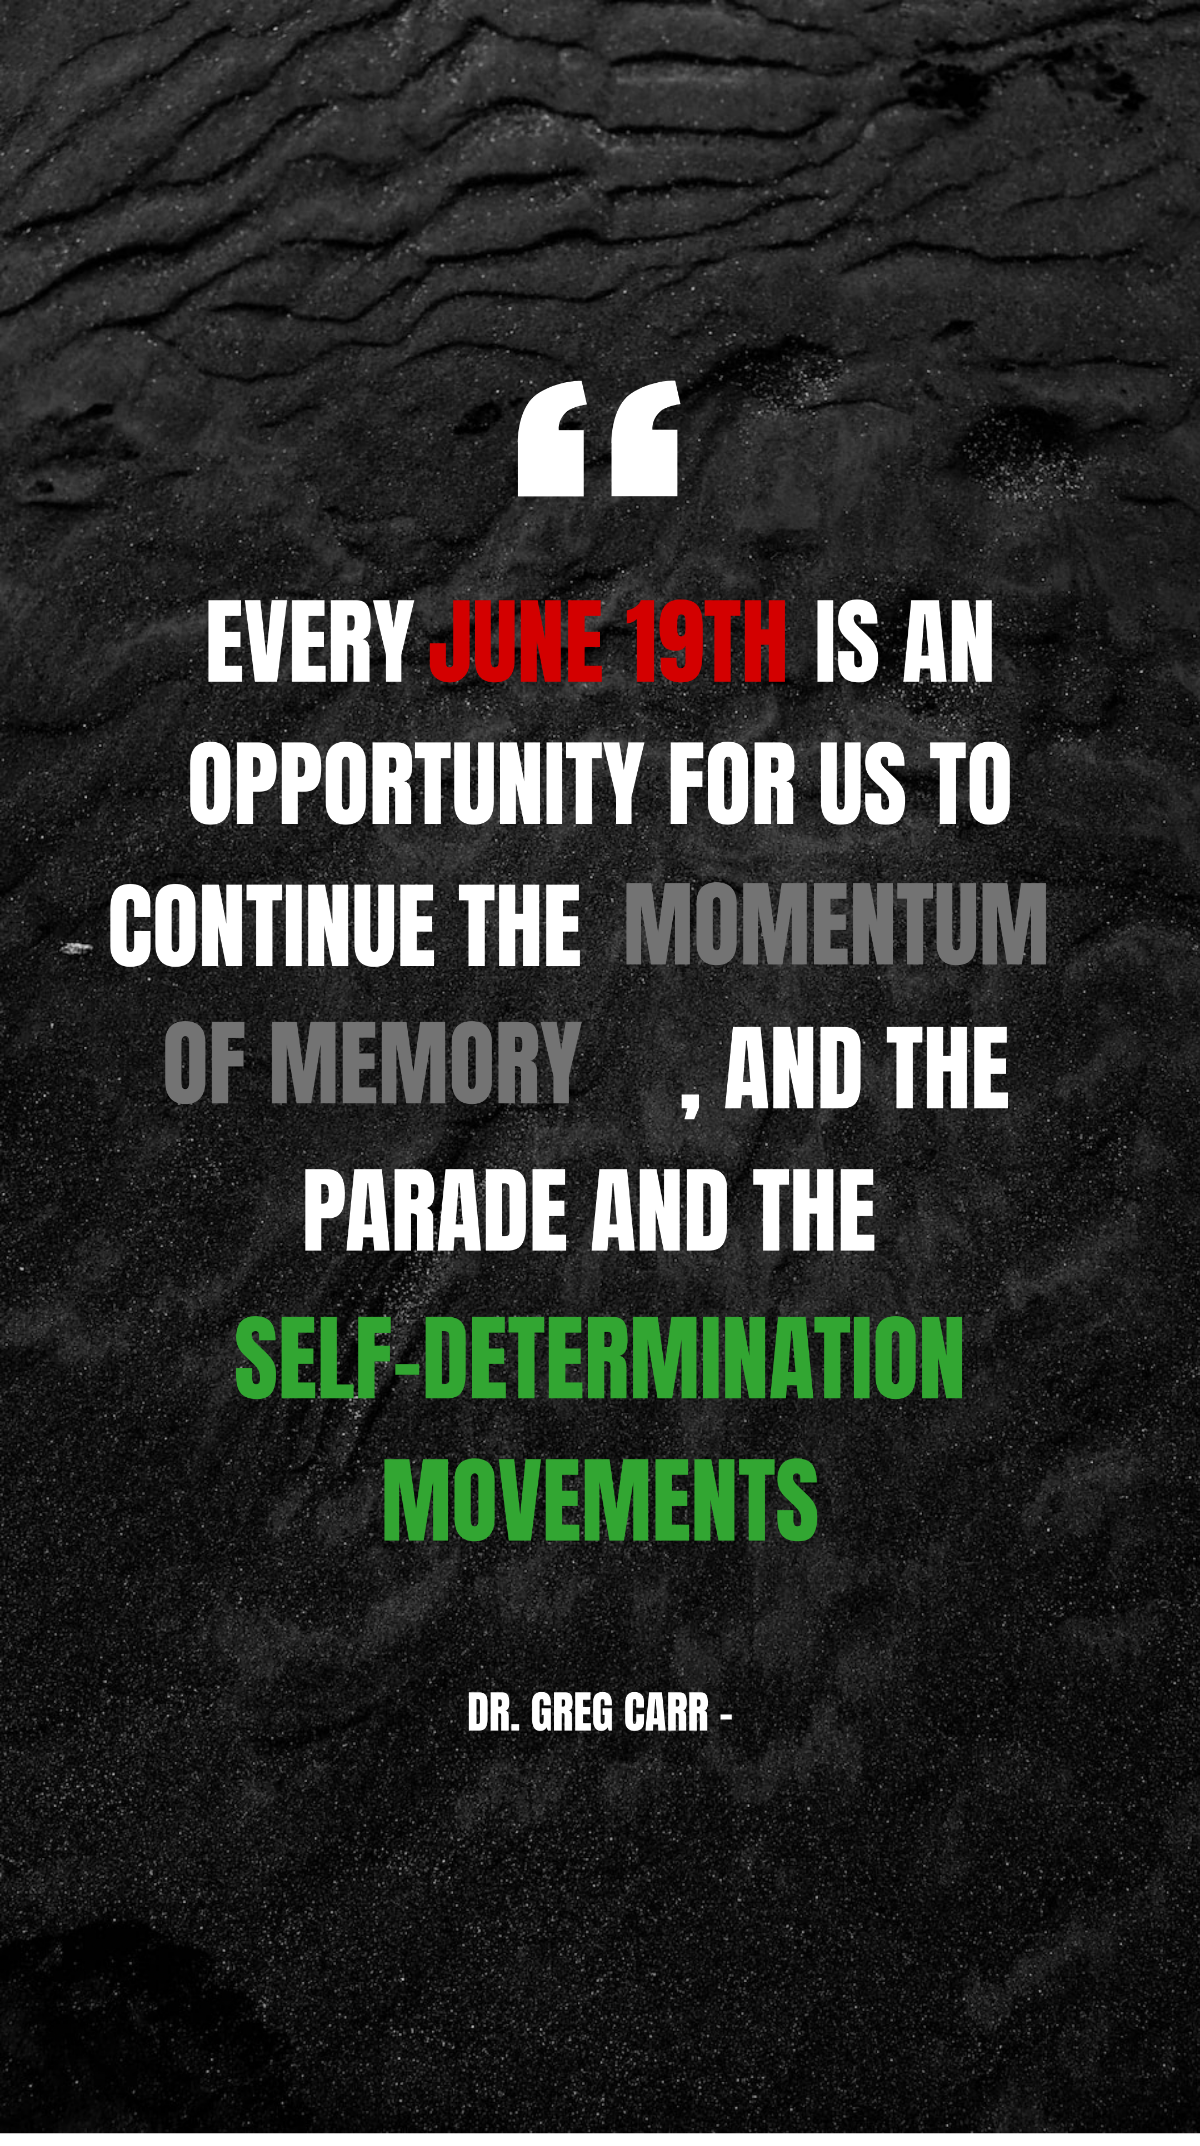 Dr. Greg Carr - Every June 19th is an opportunity for us to continue the momentum of memory, and the parade and the self-determination movements.